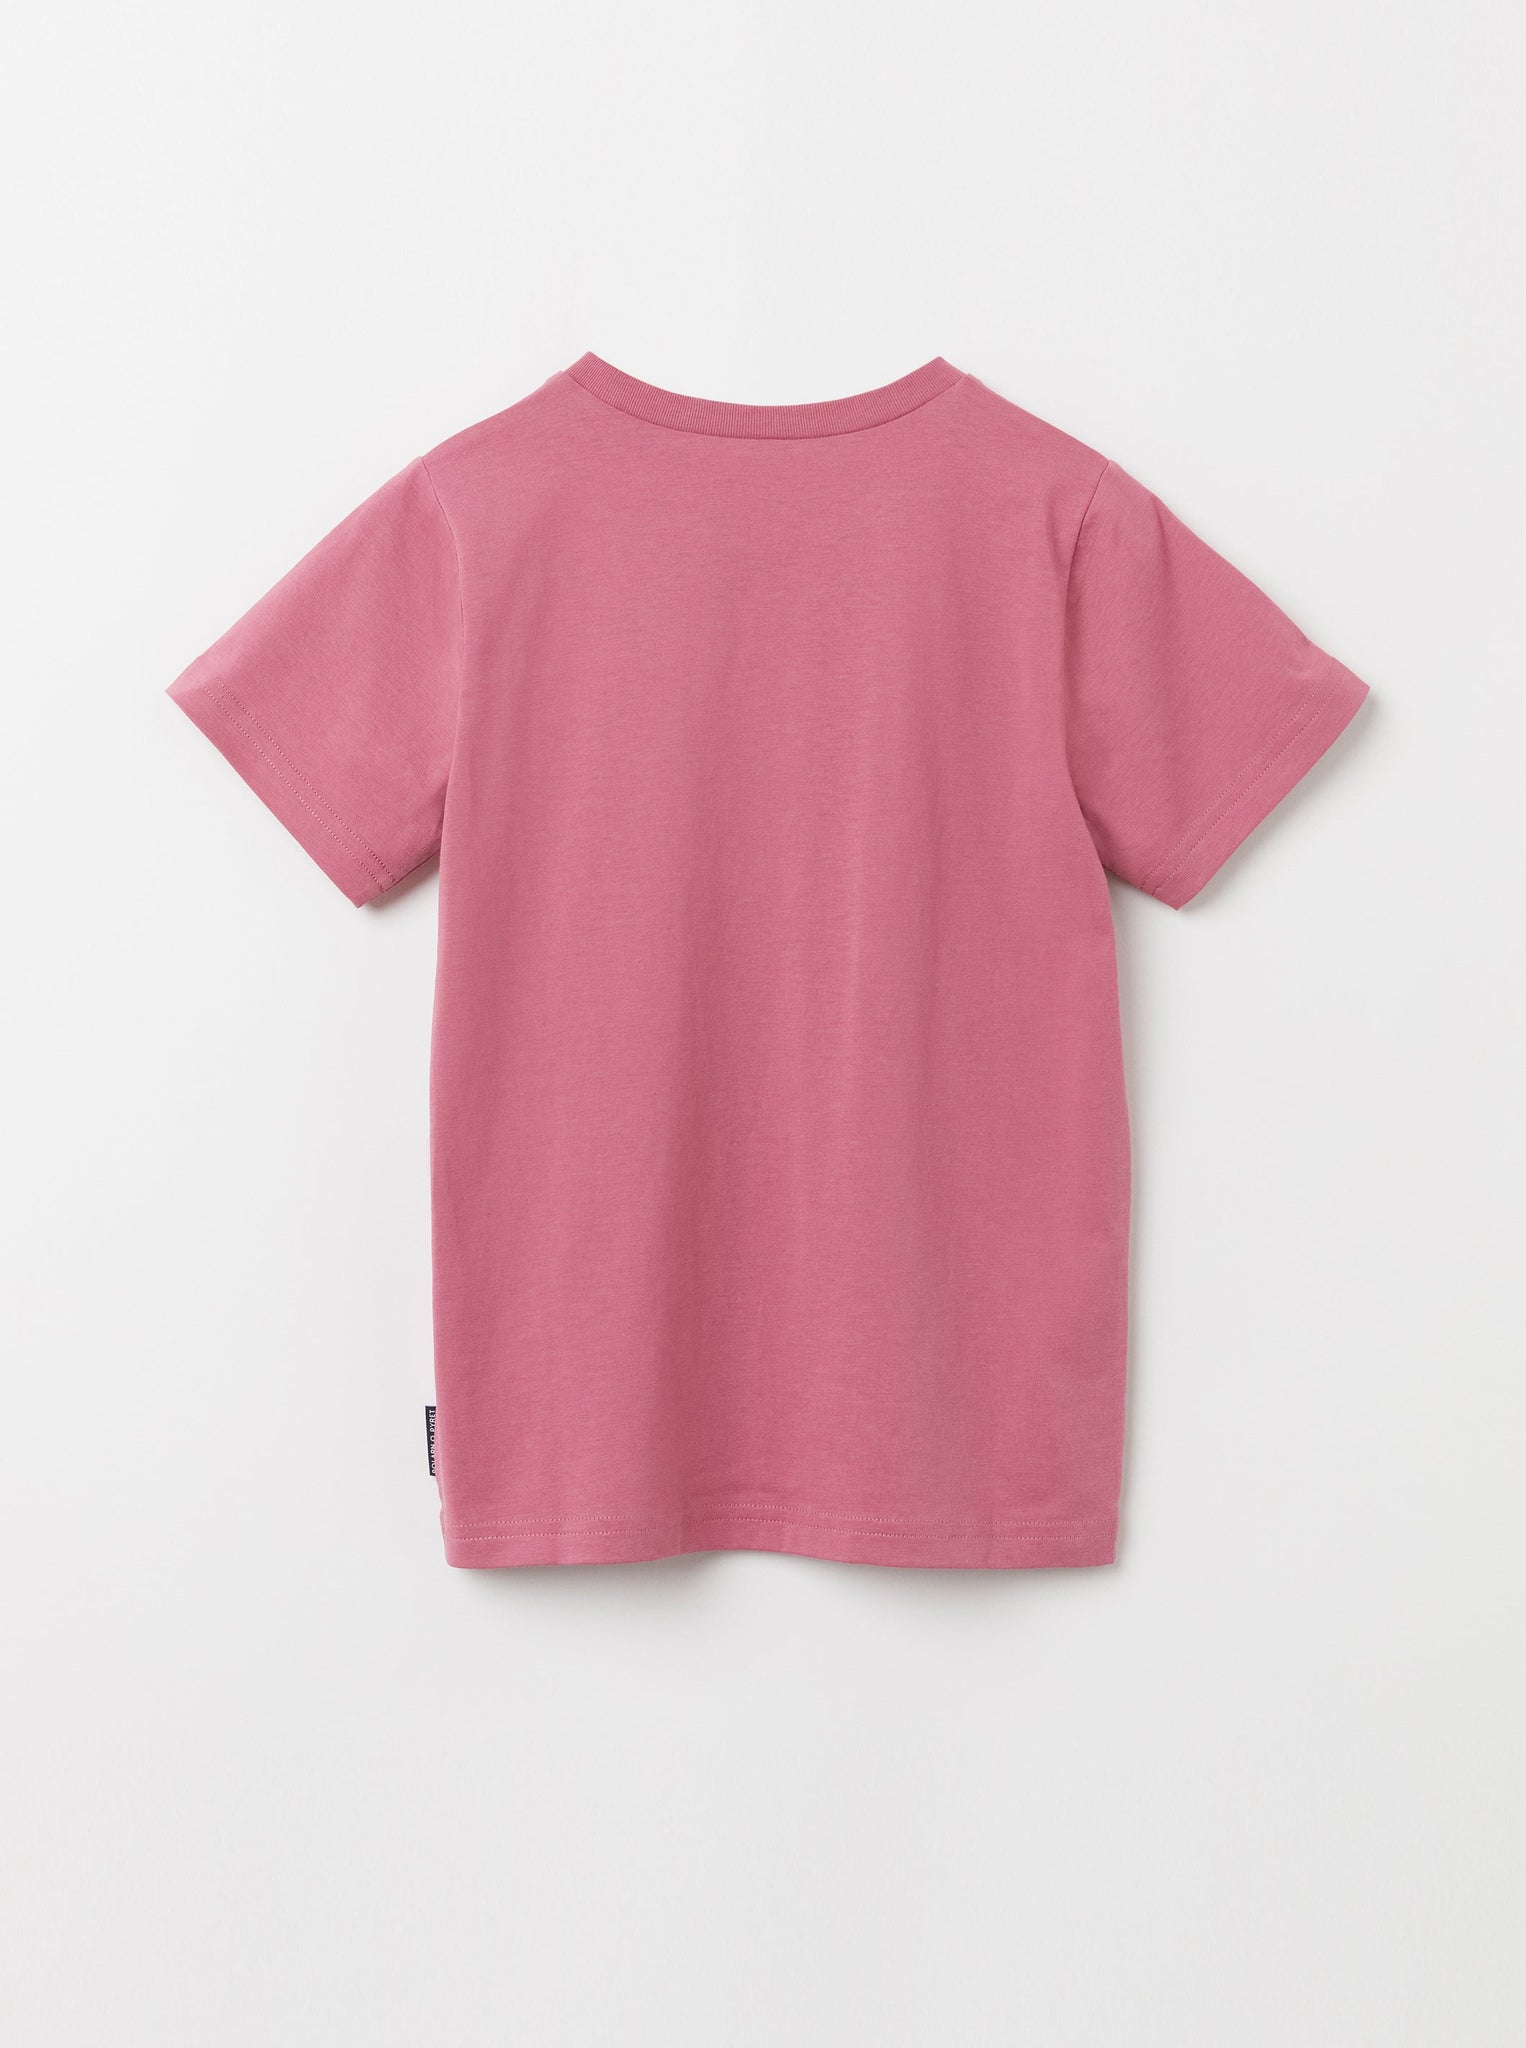 Organic Cotton Navy Kids T-Shirt from the Polarn O. Pyret Kidswear collection. Ethically produced kids clothing.